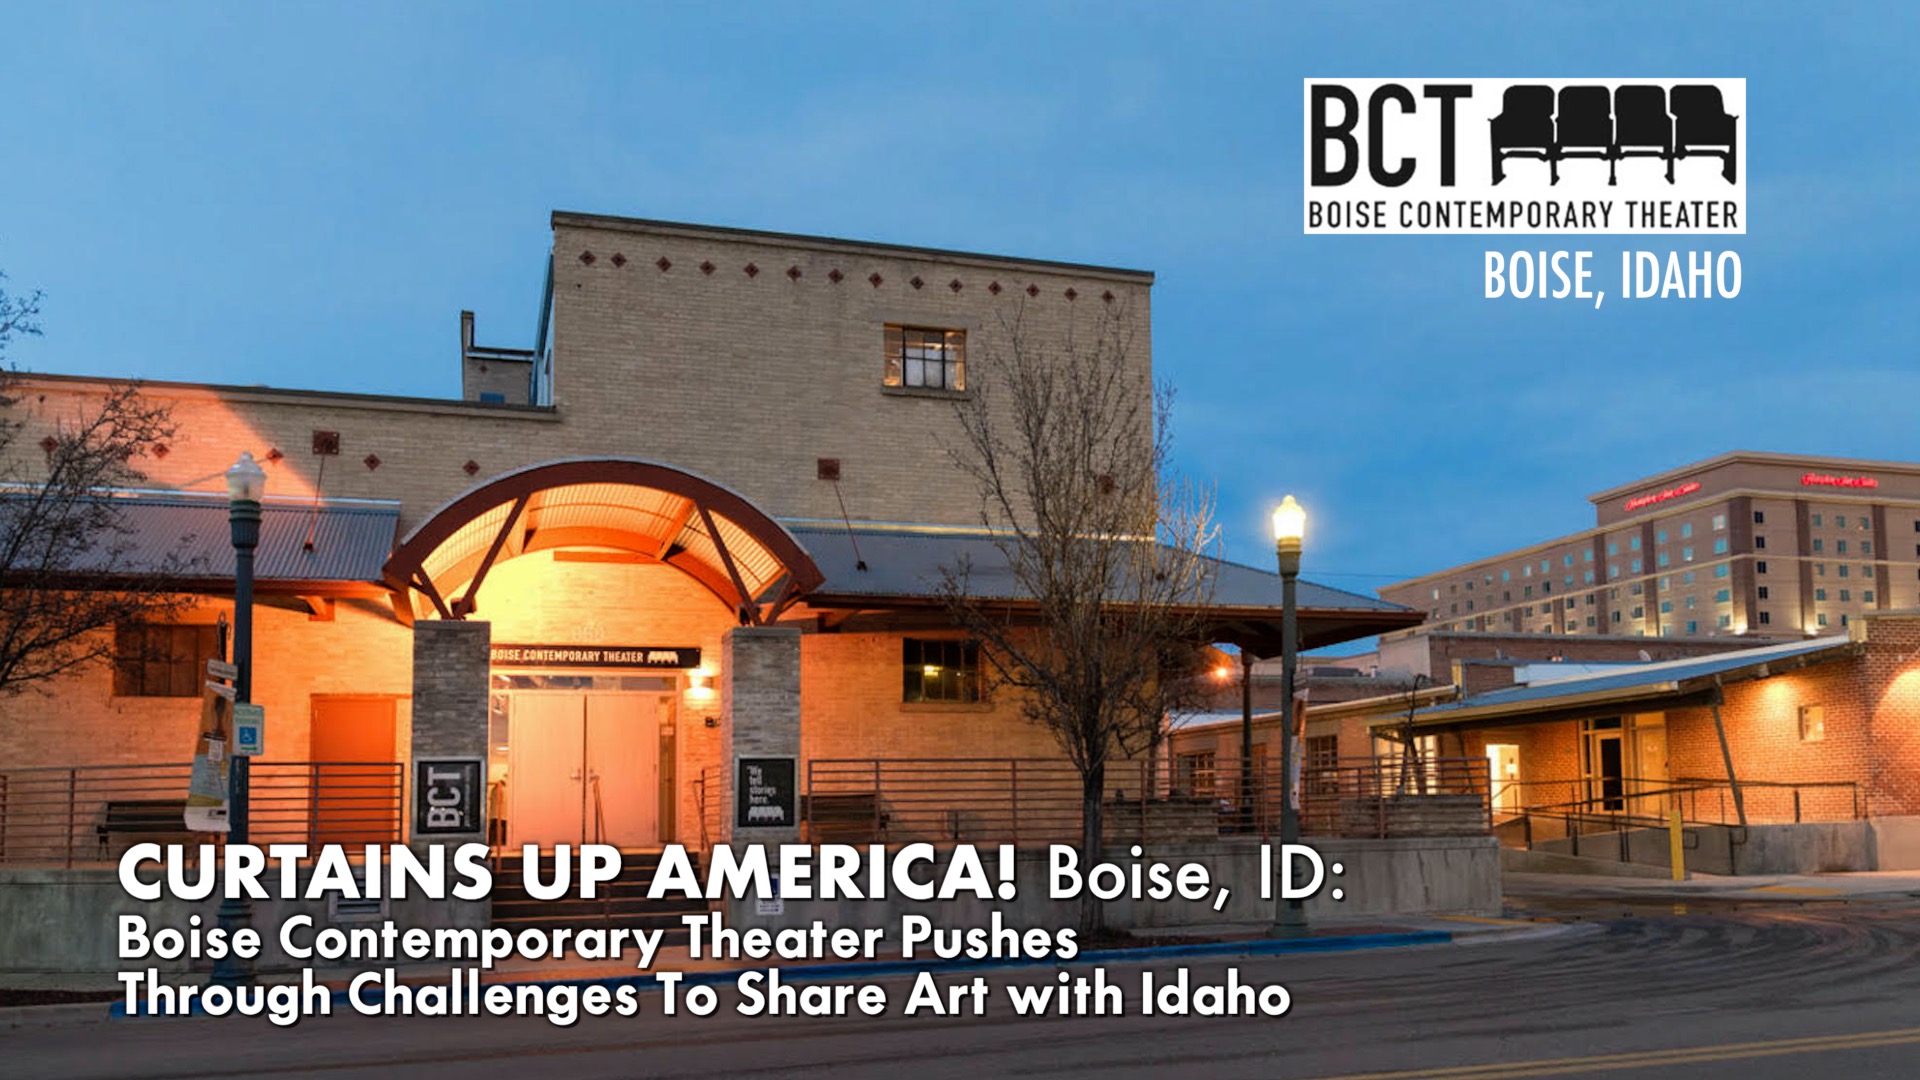 CURTAINS UP AMERICA! Boise Contemporary Theater Pushes Through Challenges To Share Art with Idaho